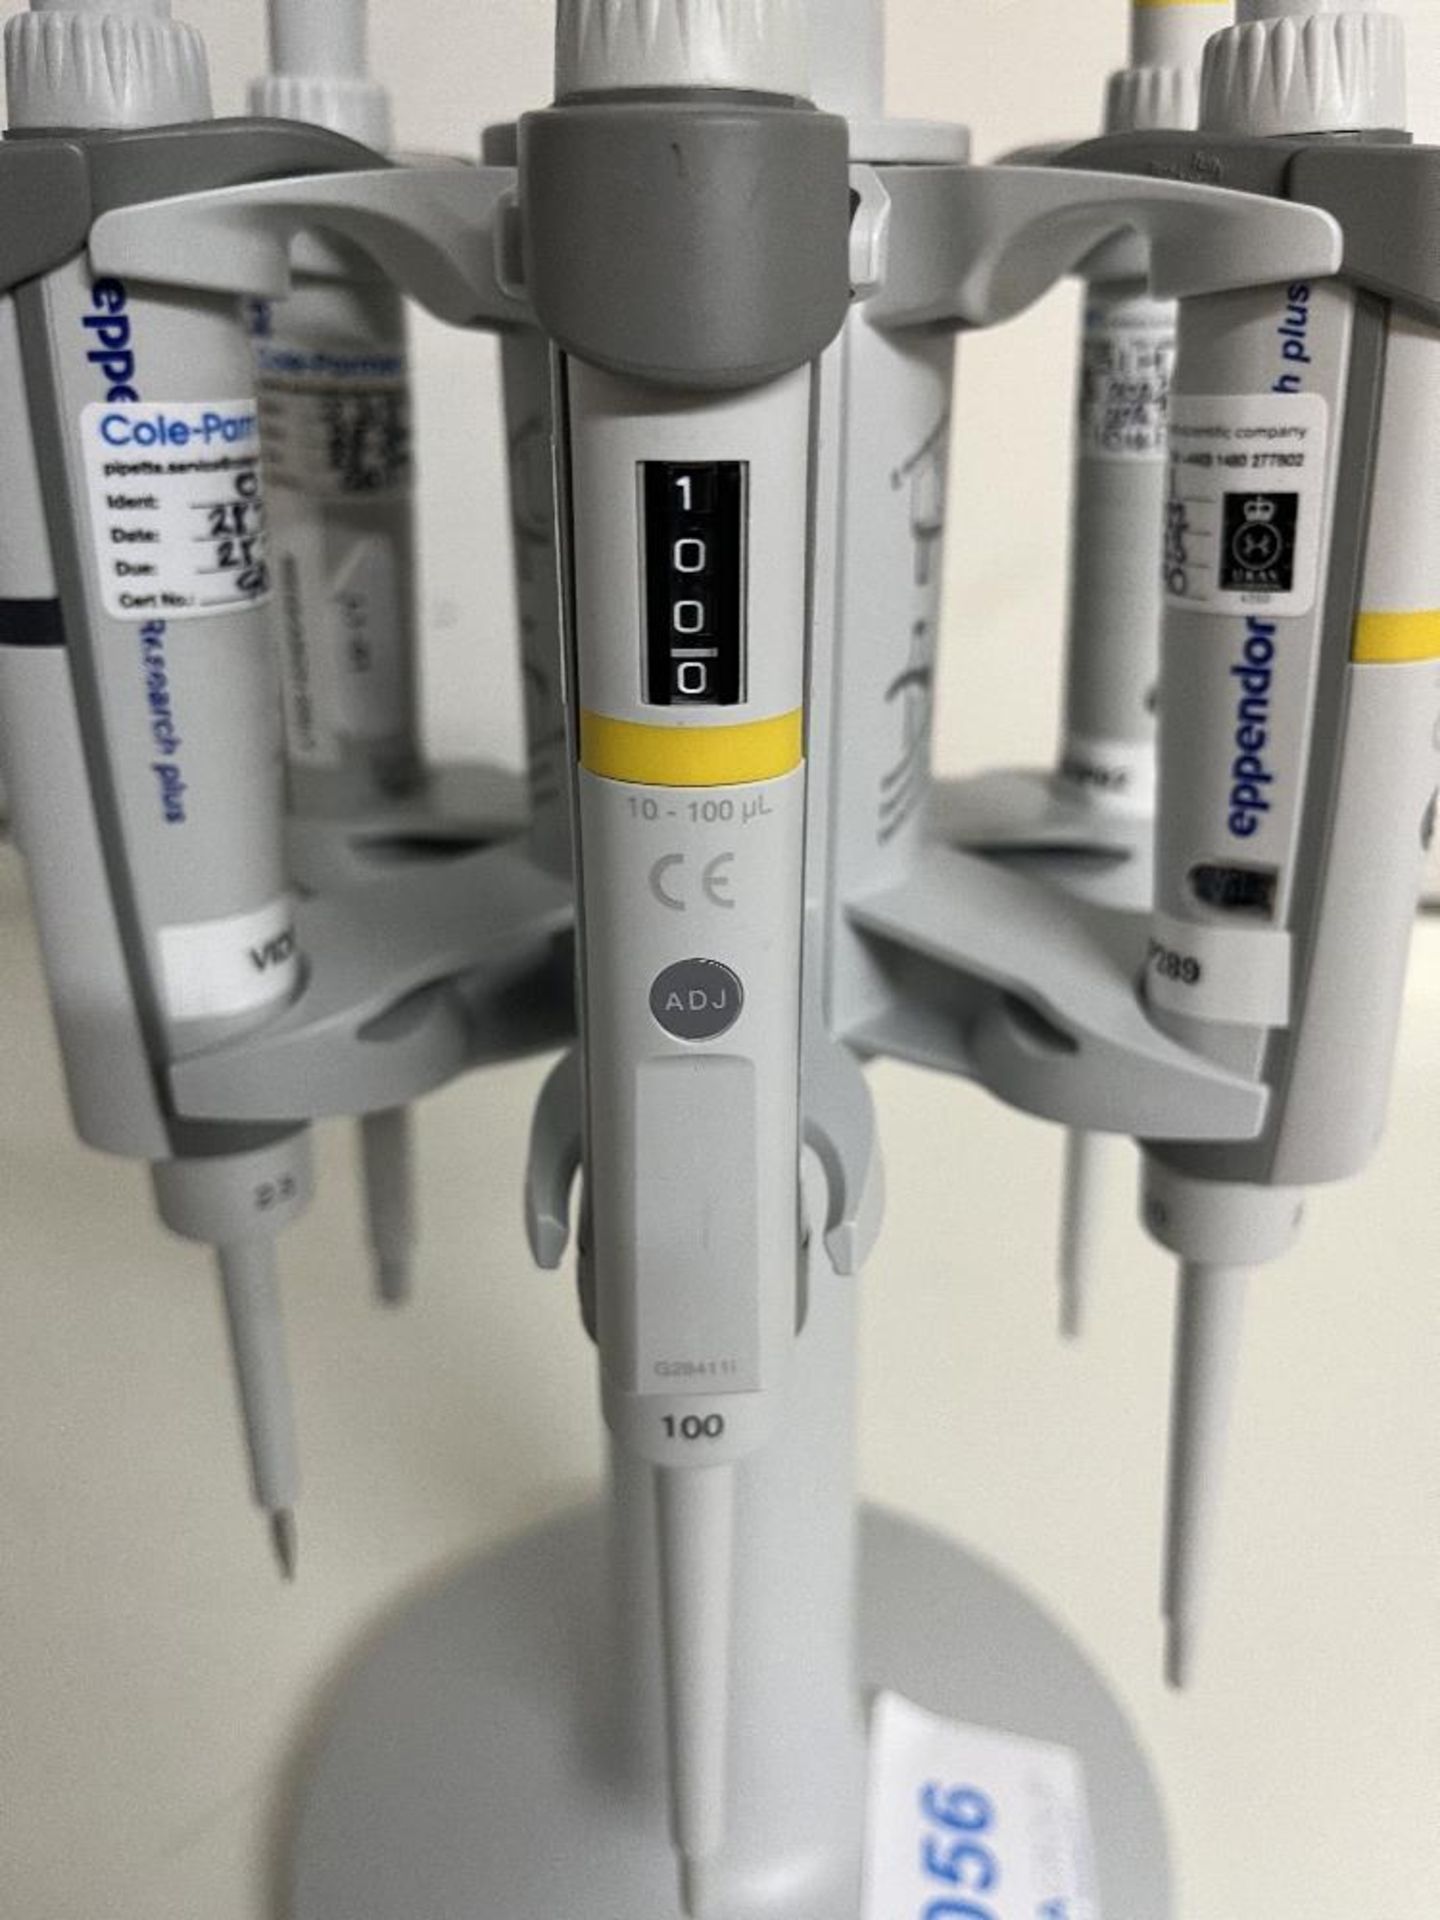 Eppendorf Pipette Carousel 2 with (6) Adjustable Volume Pipettes - Image 5 of 8